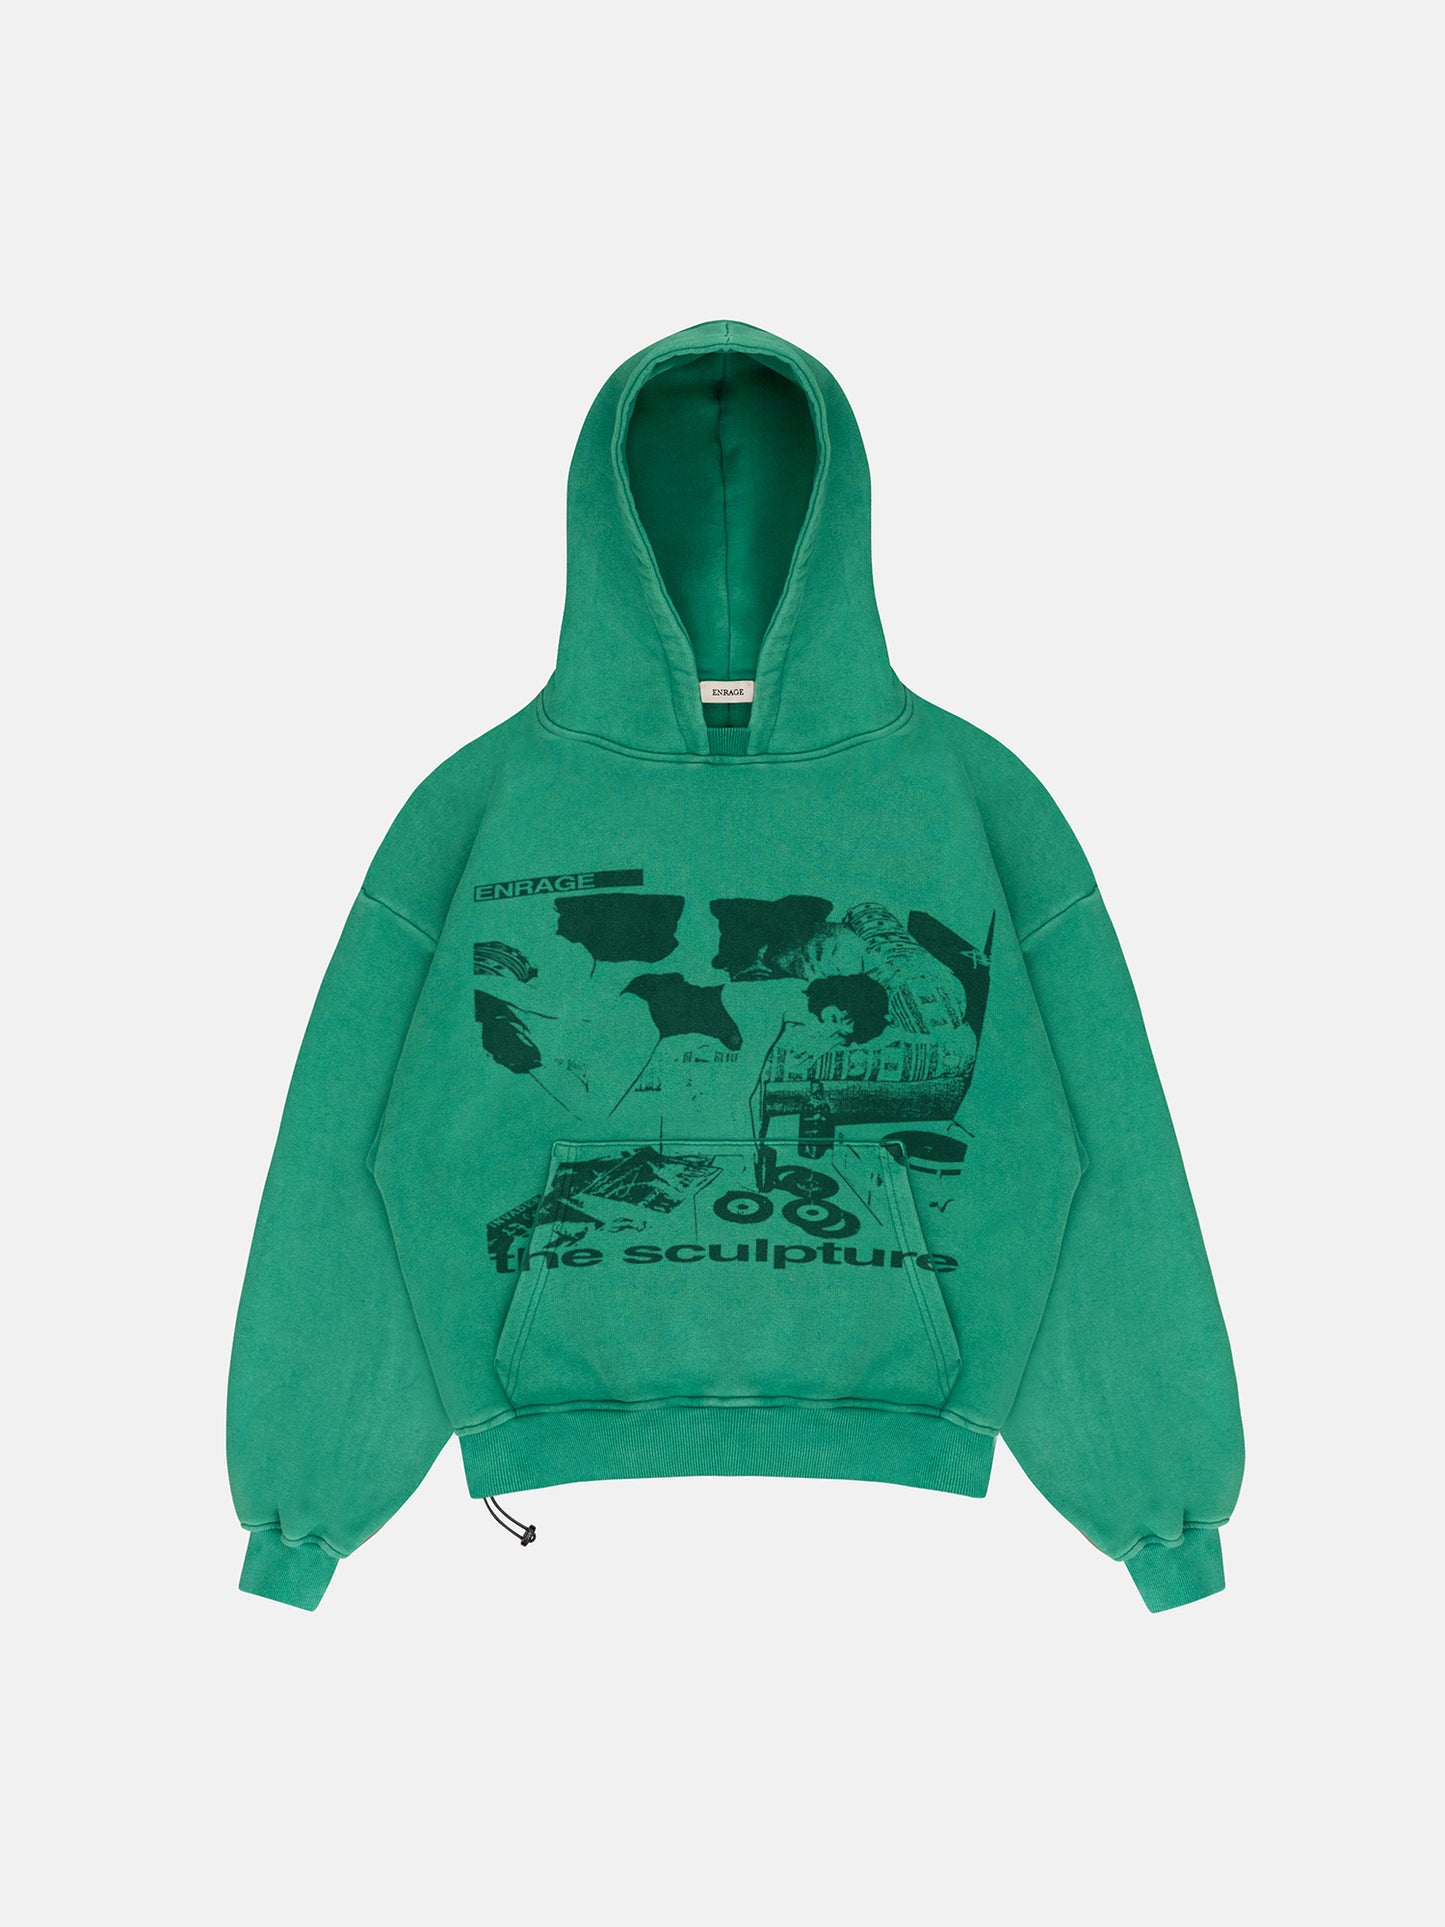 SCULPTURE EDITOR'S CUT WASHED GREEN HOODIE